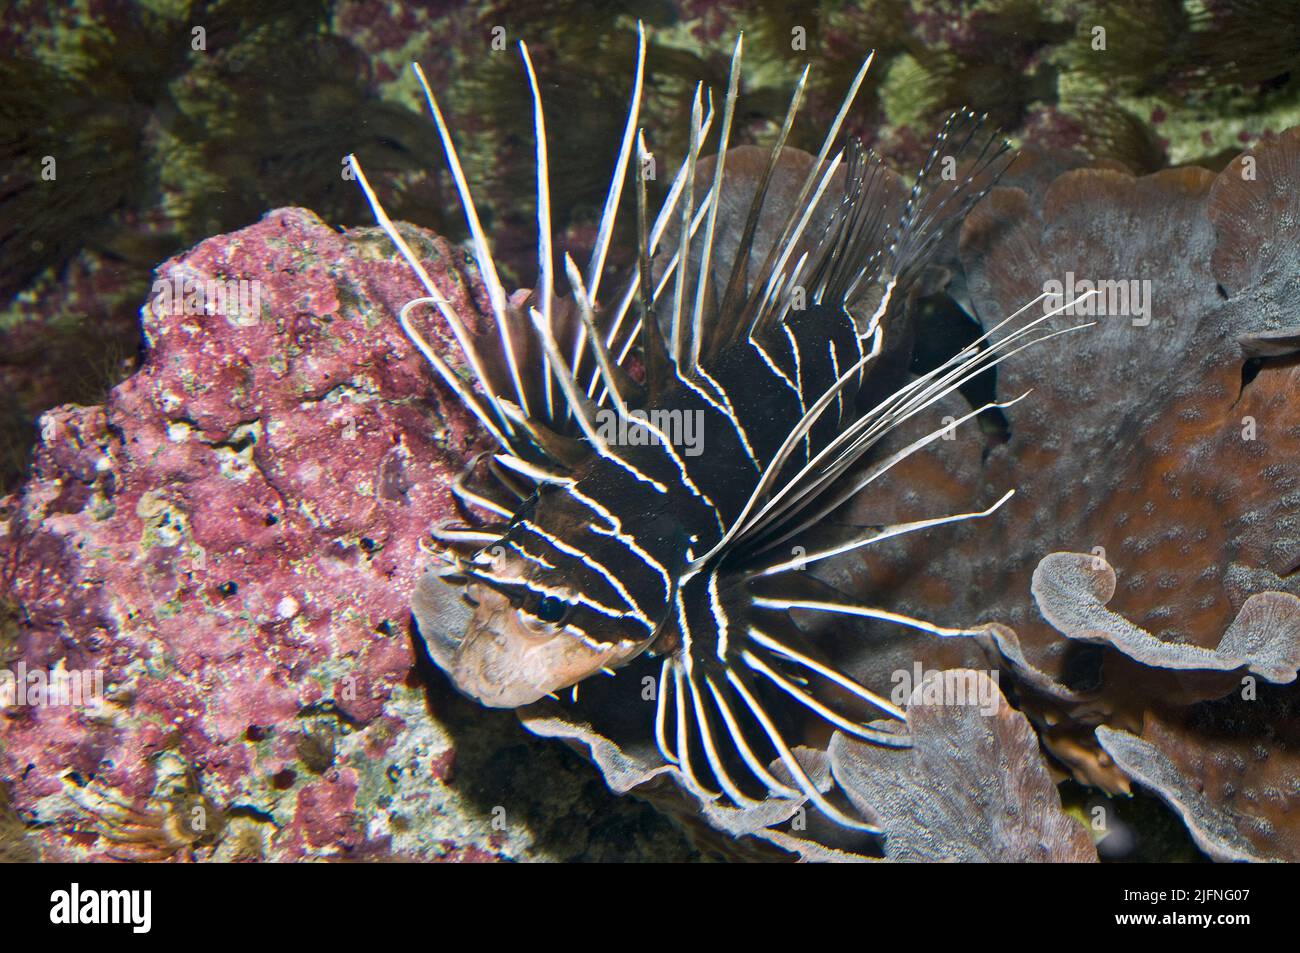 Clearfin Lionfish, Pterois radiata, from the Red Sea. Stock Photo